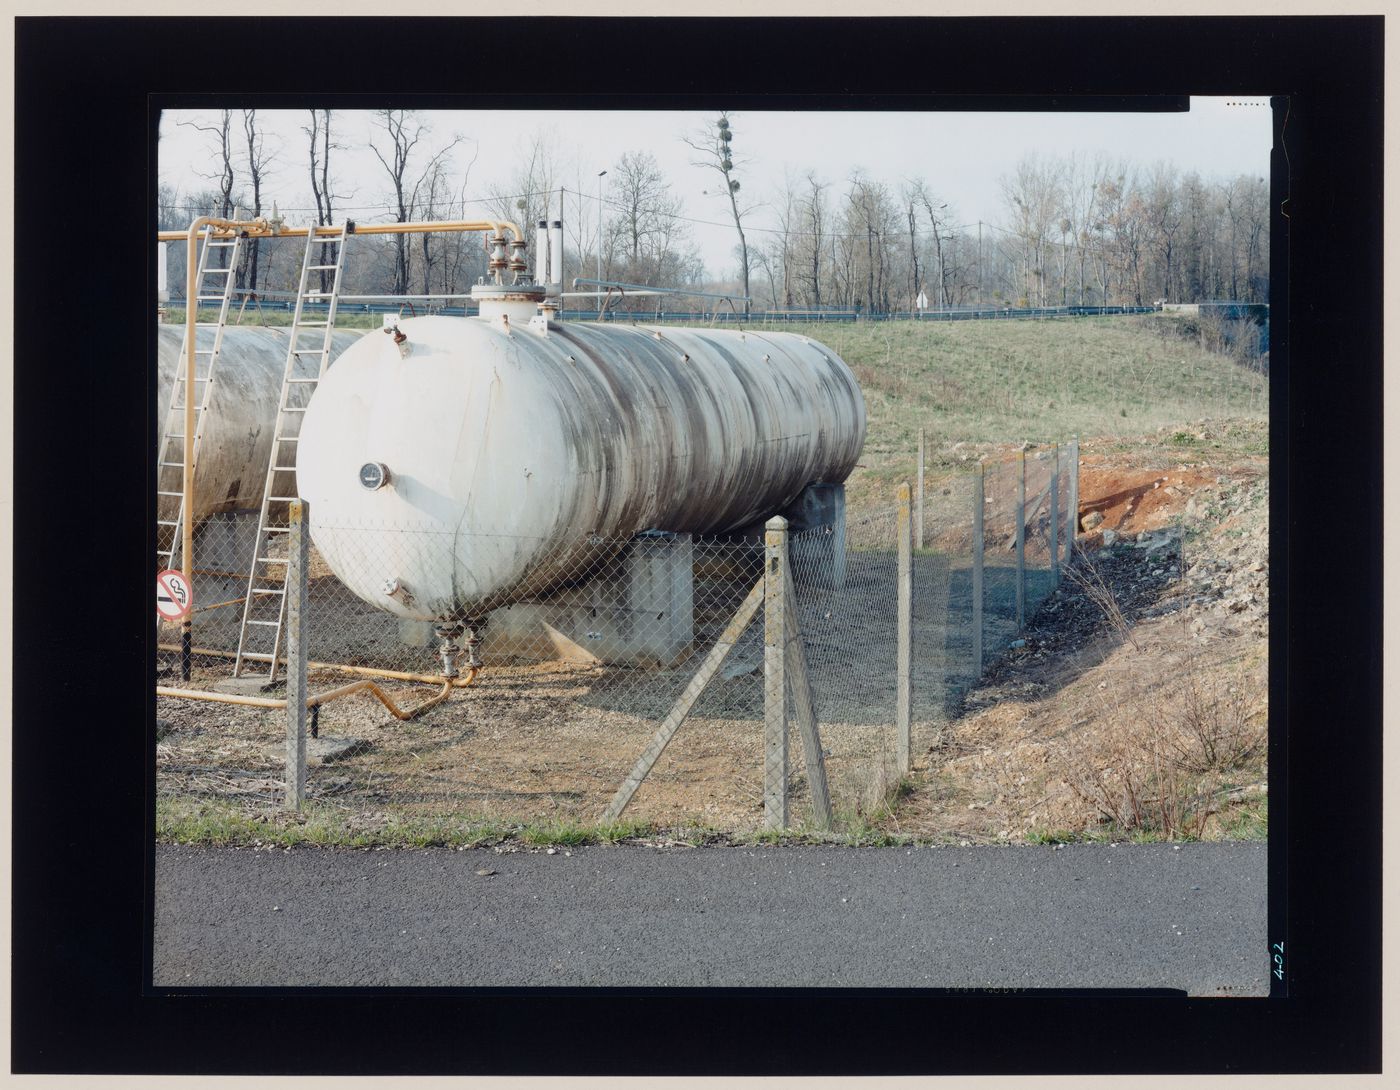 View of oil storage tanks and a fence, France